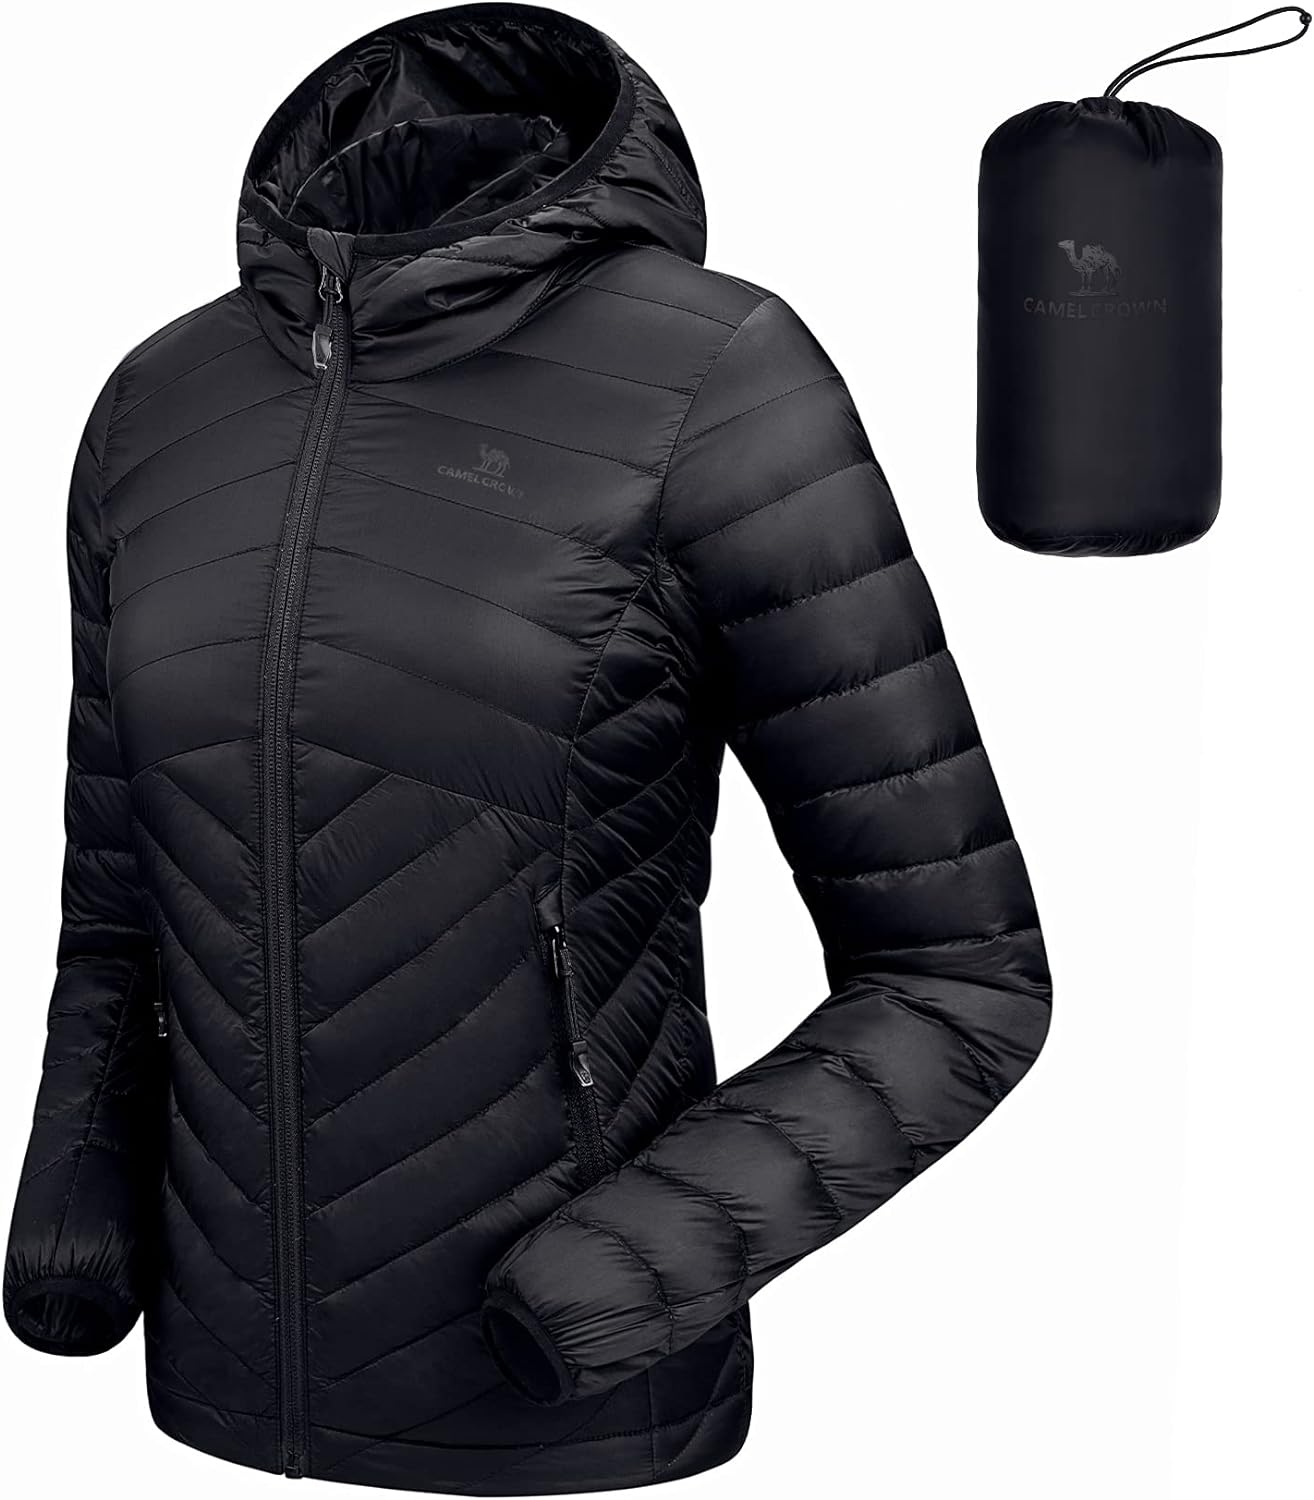 I ordered a XXL but I thought it was a bit big but not sure now. I may not return it. Meanwhile I ordered the XL which will come in a few days.  I found that LOFT to perk up after hanging it. It really is light weight.  I wanted this for an upcoming trip where I have a hood on my jacket.  I am not sure why they put tin foil like material in the lower bottom but it actually STUFFS into the small sack with LOTS of work.I think the jacket is very nice for the price.  The hood fits nicely around my face and does NOT drop over my eyes. I am just not sure if the XXL is too large but when the XL comes, and its too snug, I may keep the XXL.I like the slim zipper on the front.  The color is lovely and true to what the picture shows. I a 5'8" and built a bit full in the stomach area.  So that is why I ordered the XXL.  Time will tell.  I think overall the jacket is very well made.